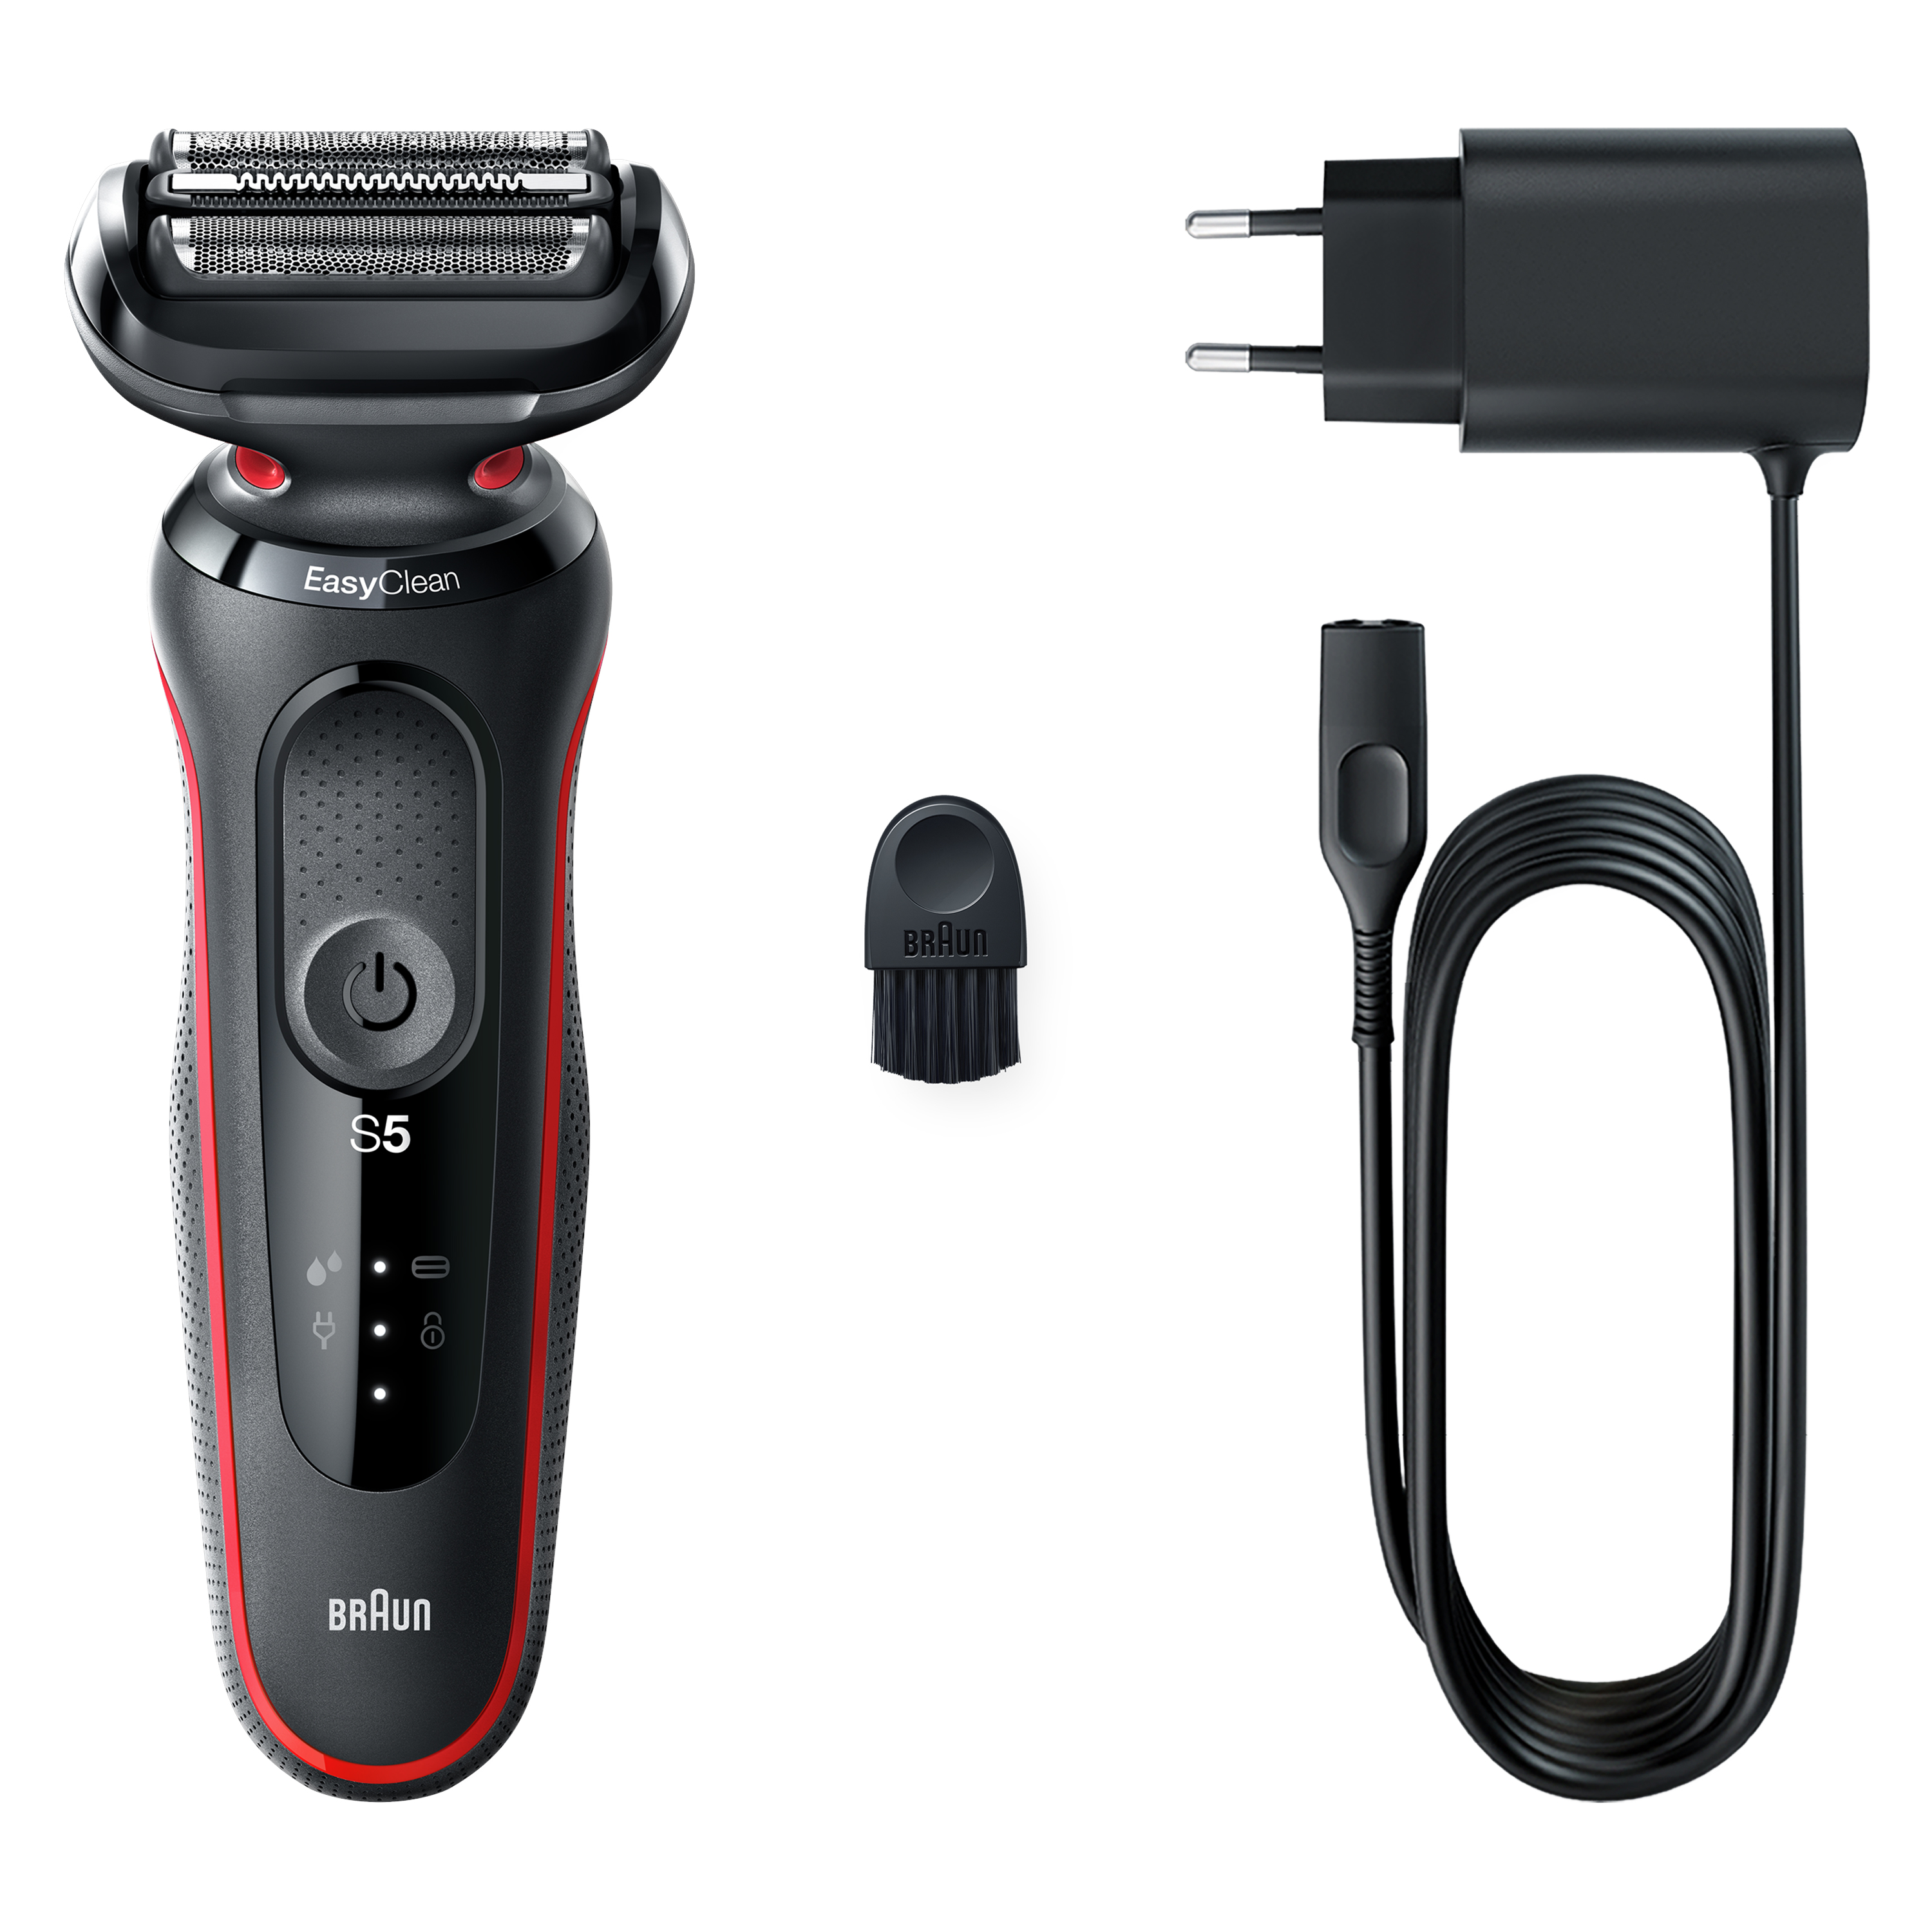 Series 5 51-R1000s Wet & shaver, Dry